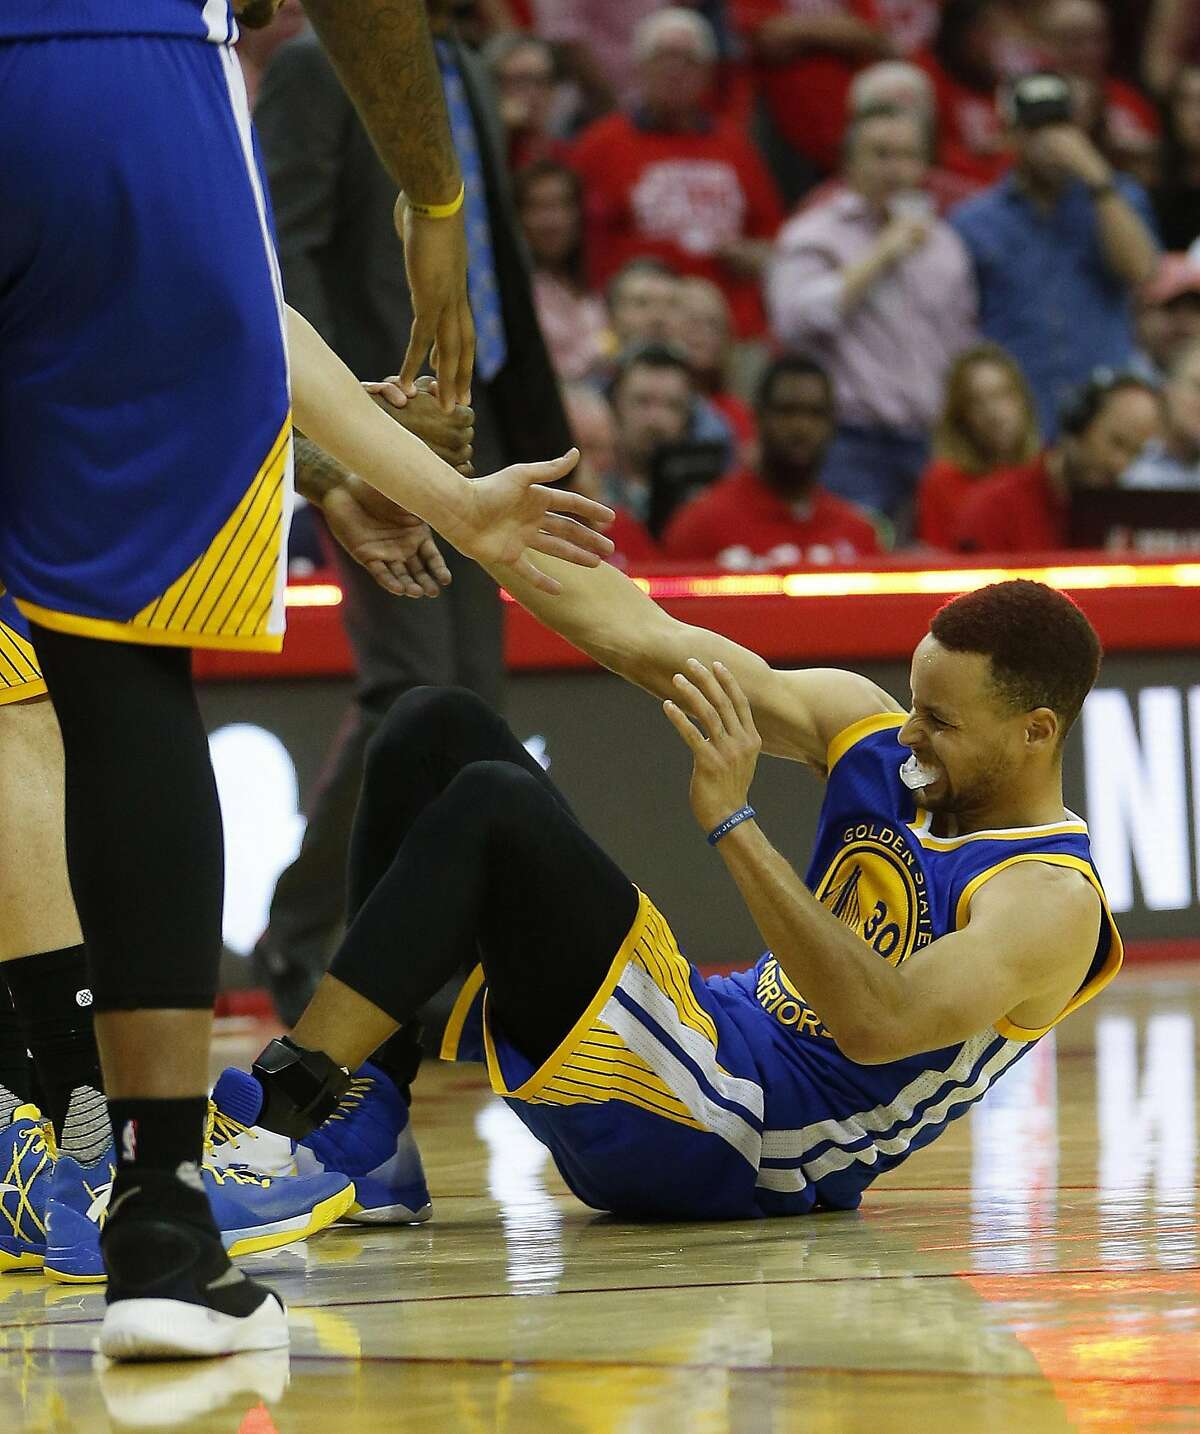 Golden State Warriors guard Stephen Curry (30) is helped up after being injured during the final play of the first half of game four of the first round of the NBA playoff series at Toyota Center, Sunday, April 24, 2016, in Houston. ( Karen Warren / Houston Chronicle )